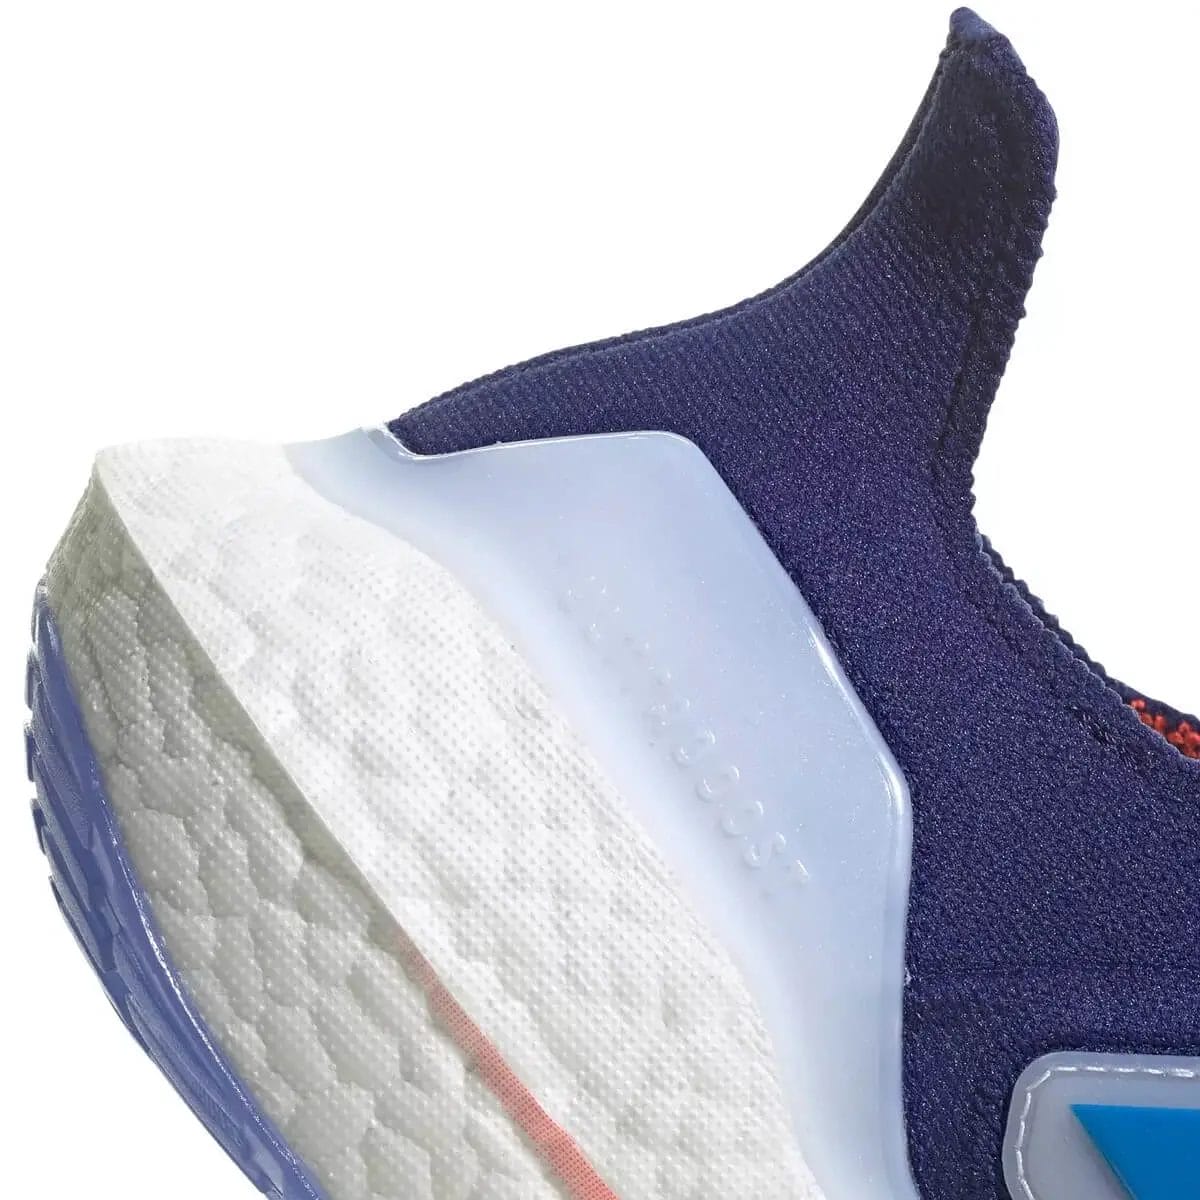 Detailed view of the heel stack and outsole.